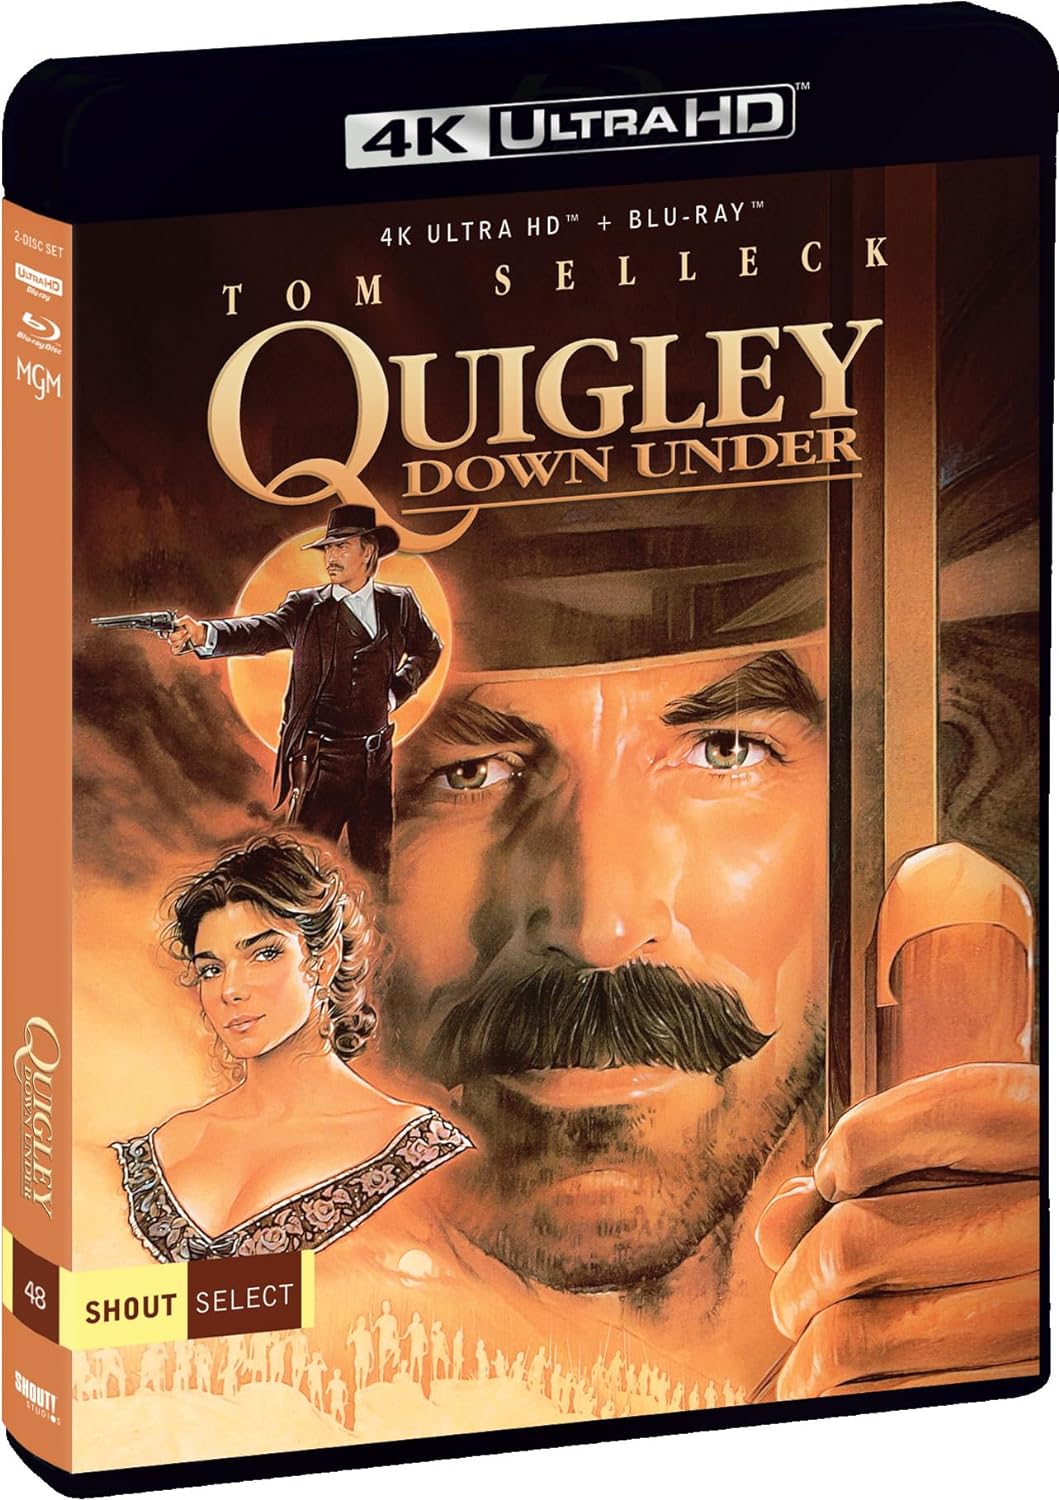 Quigley Down Under 4K UHD + Blu-ray (Shout Factory) [Preorder]